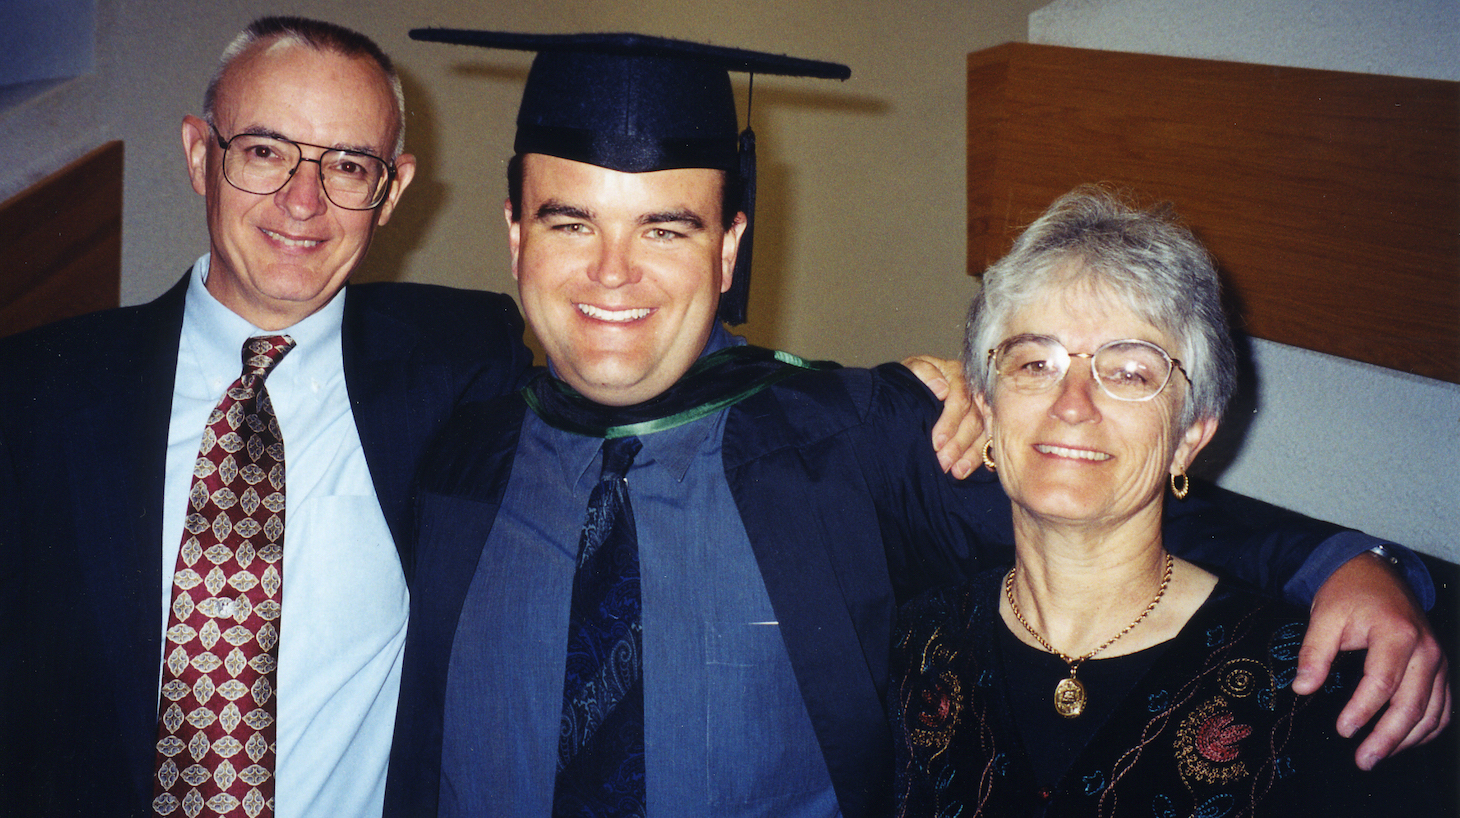 Photo of Andrew Bagby and his parents David and Kathleen Bagby at Andrew's graduation from medical school.